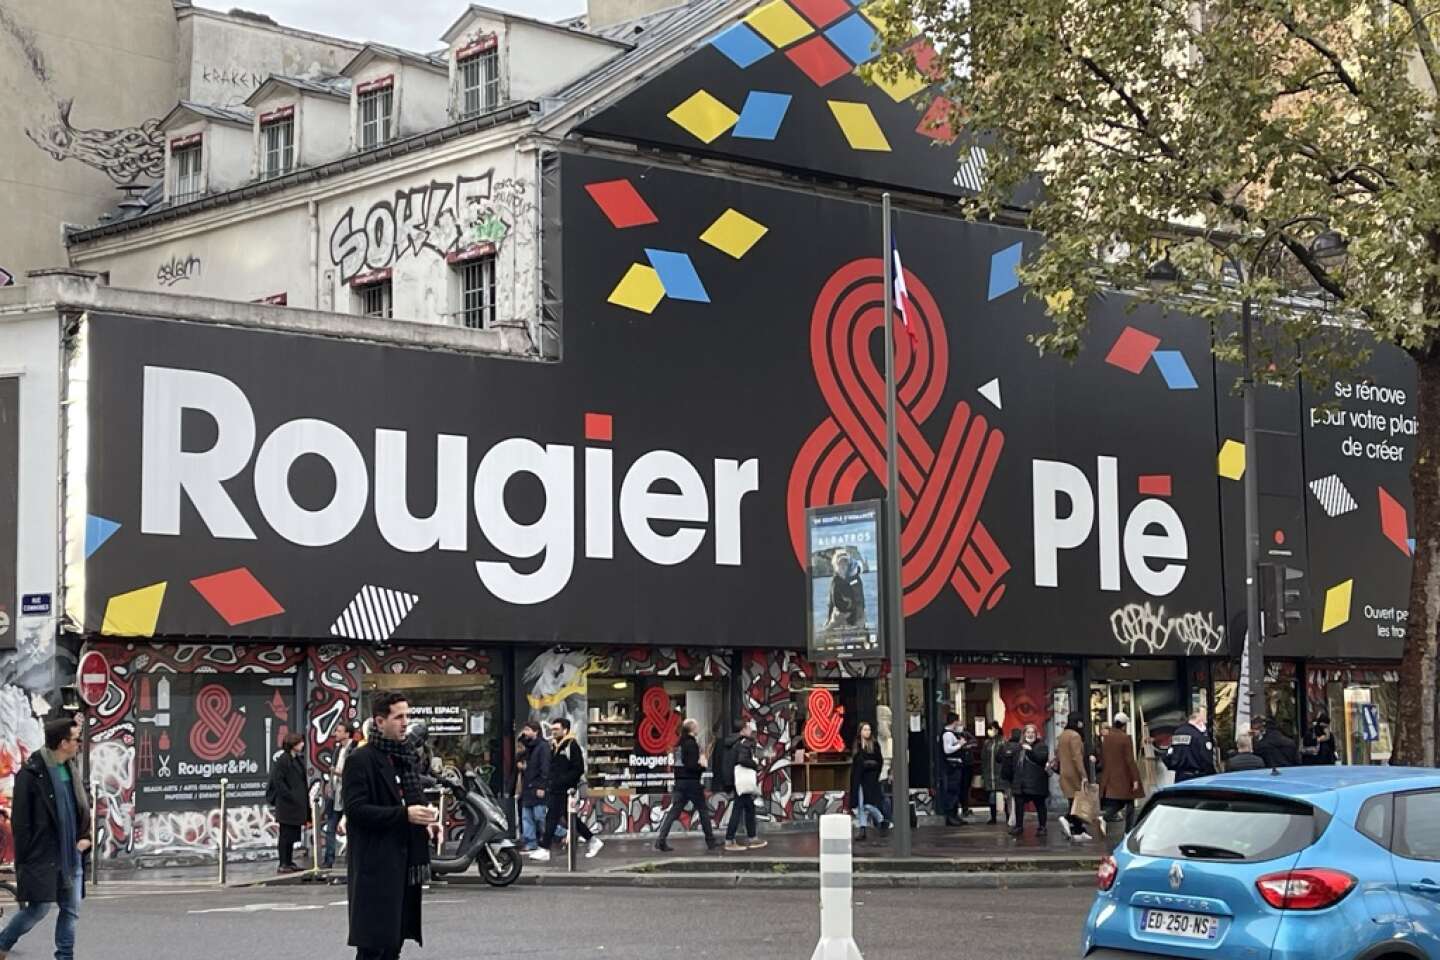 At Rougier & Plé, strikers threatened with dismissal